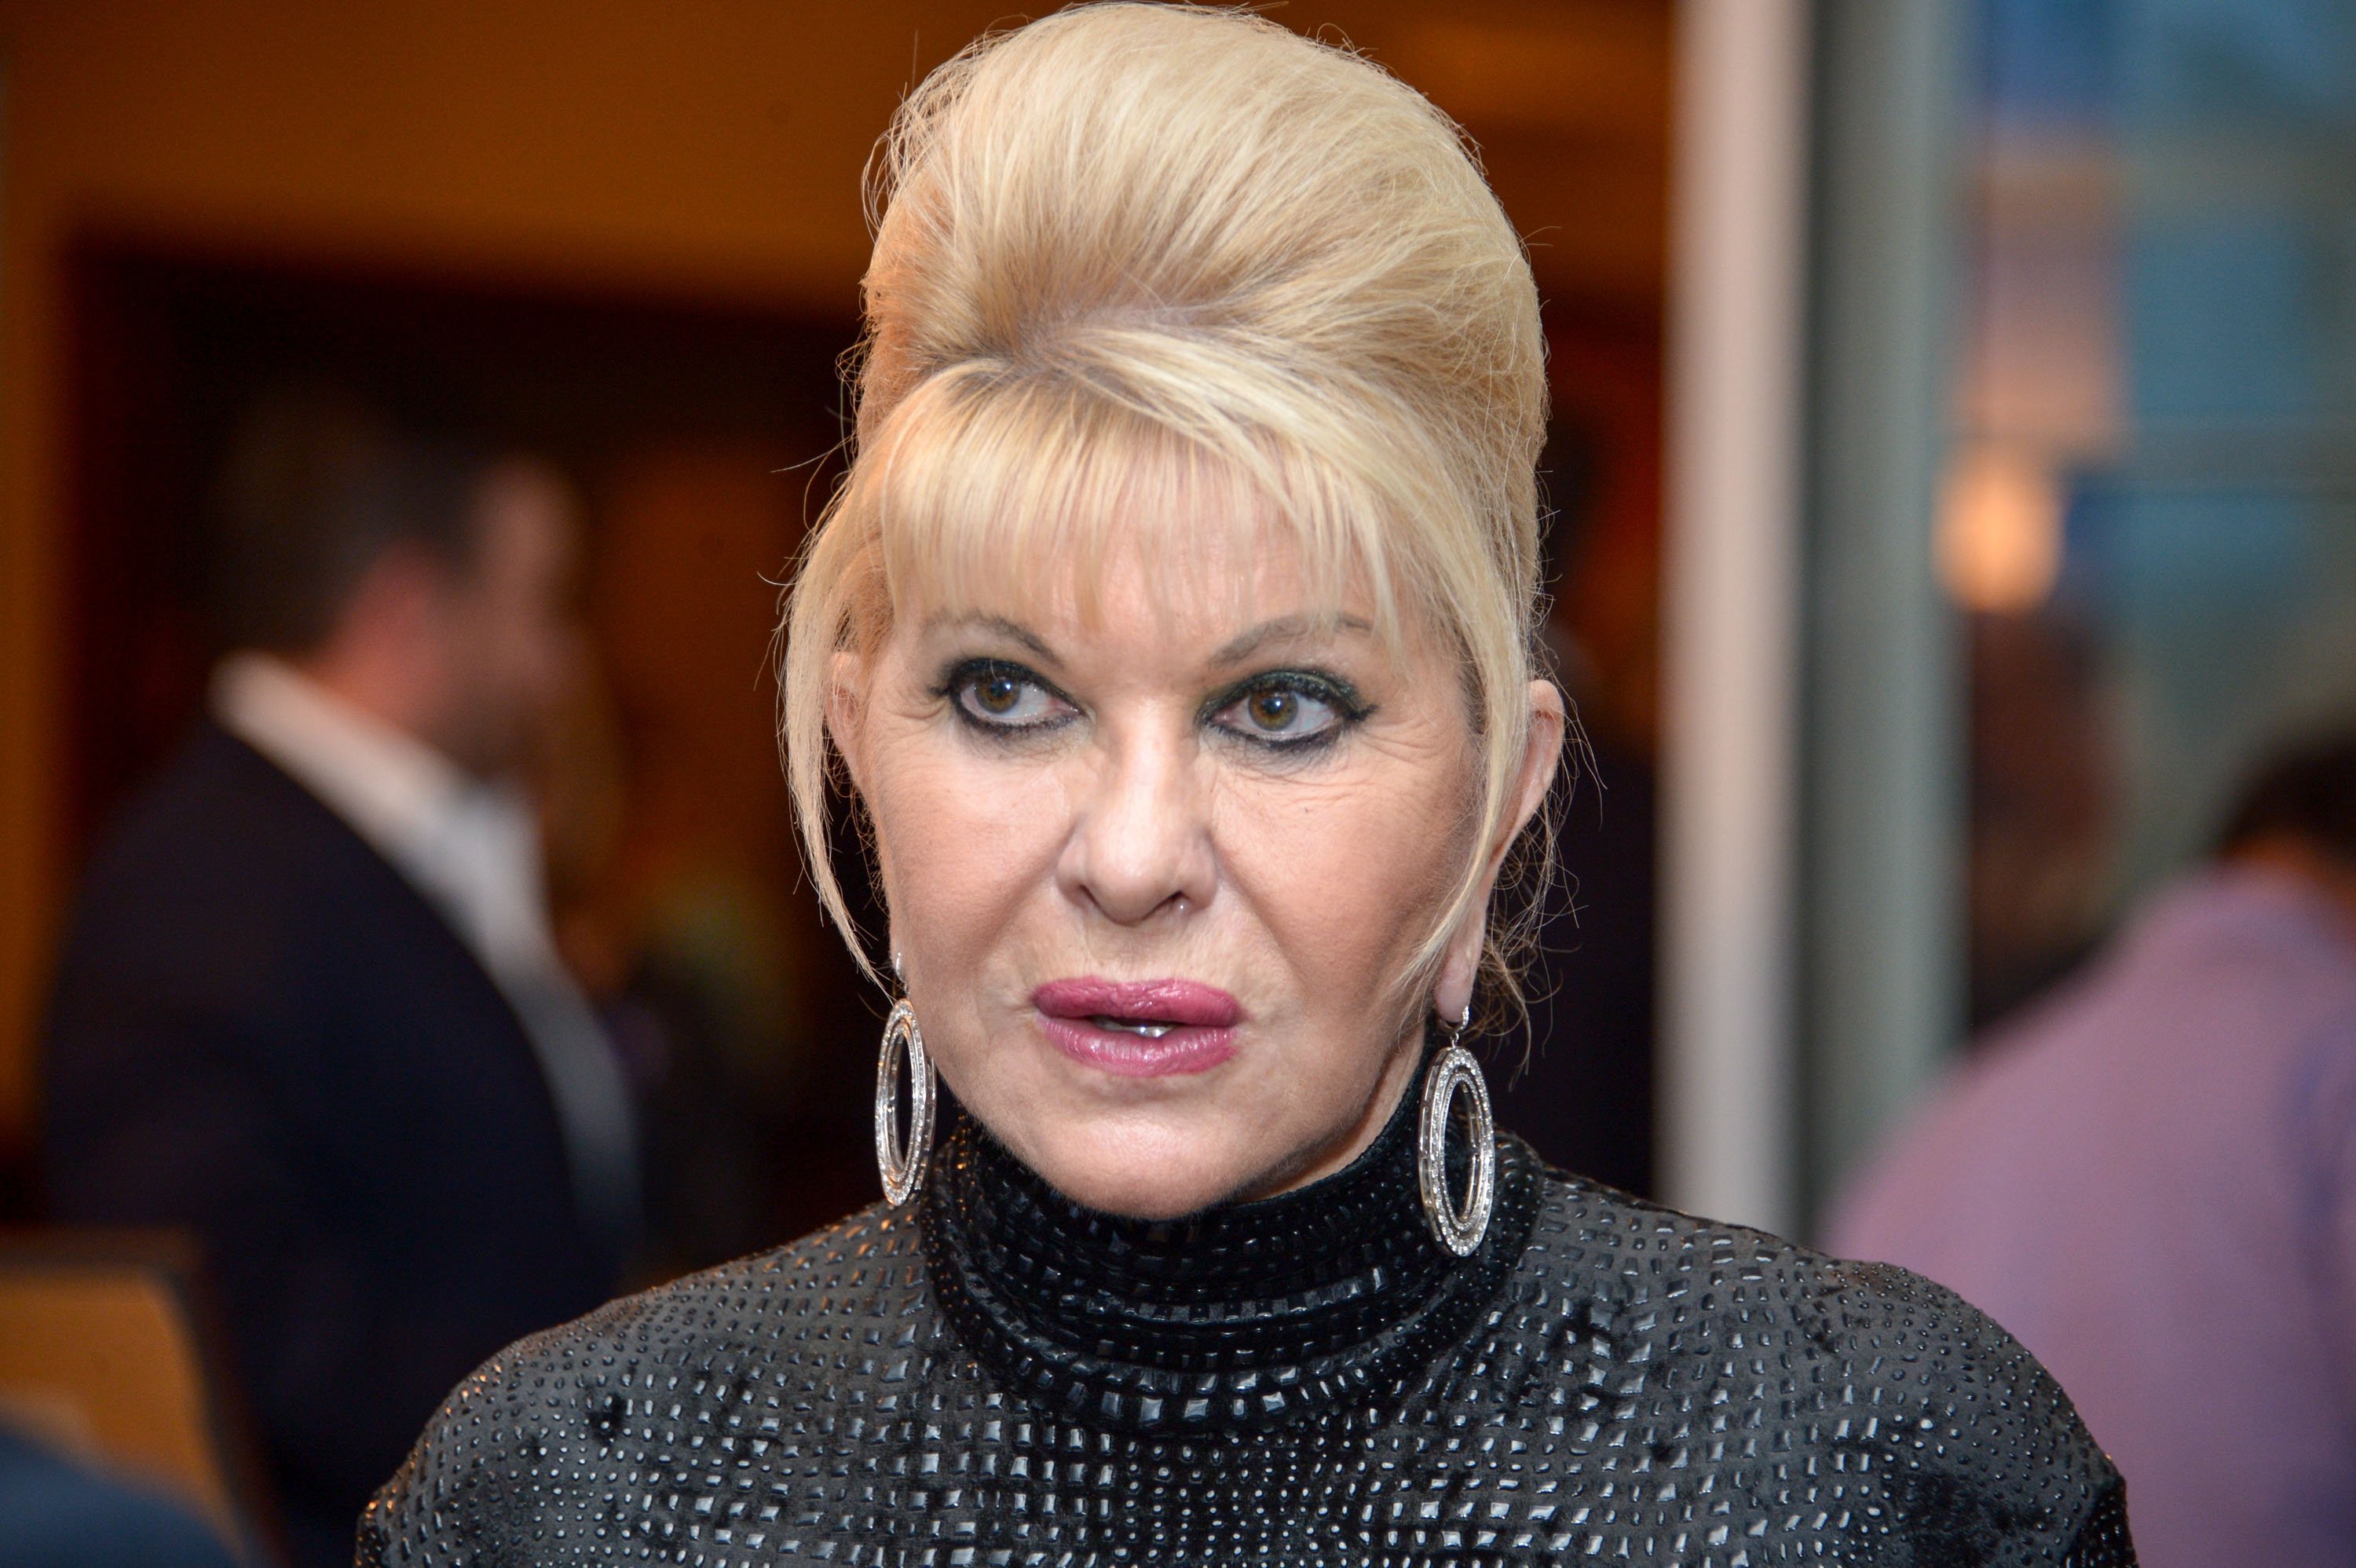 Ivana Trump at the 9th Annual Eric Trump Foundation Golf Invitational Auction & Dinner on September 21, 2015 | Photo: GettyImages